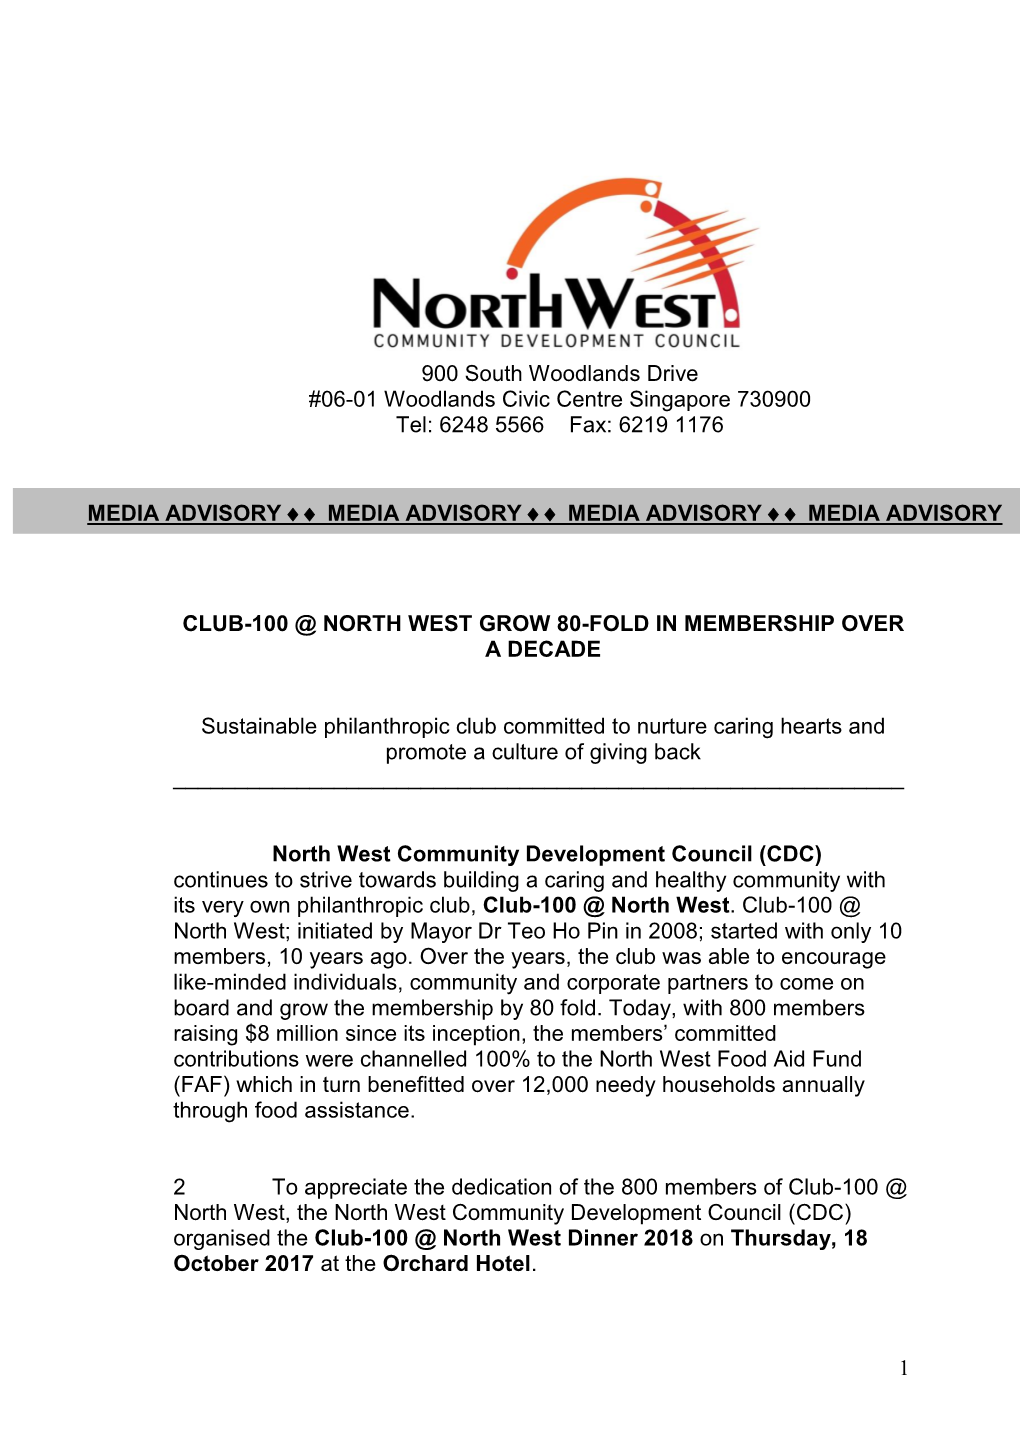 Club-100 @ North West Grows 80-Fold in Membership Over